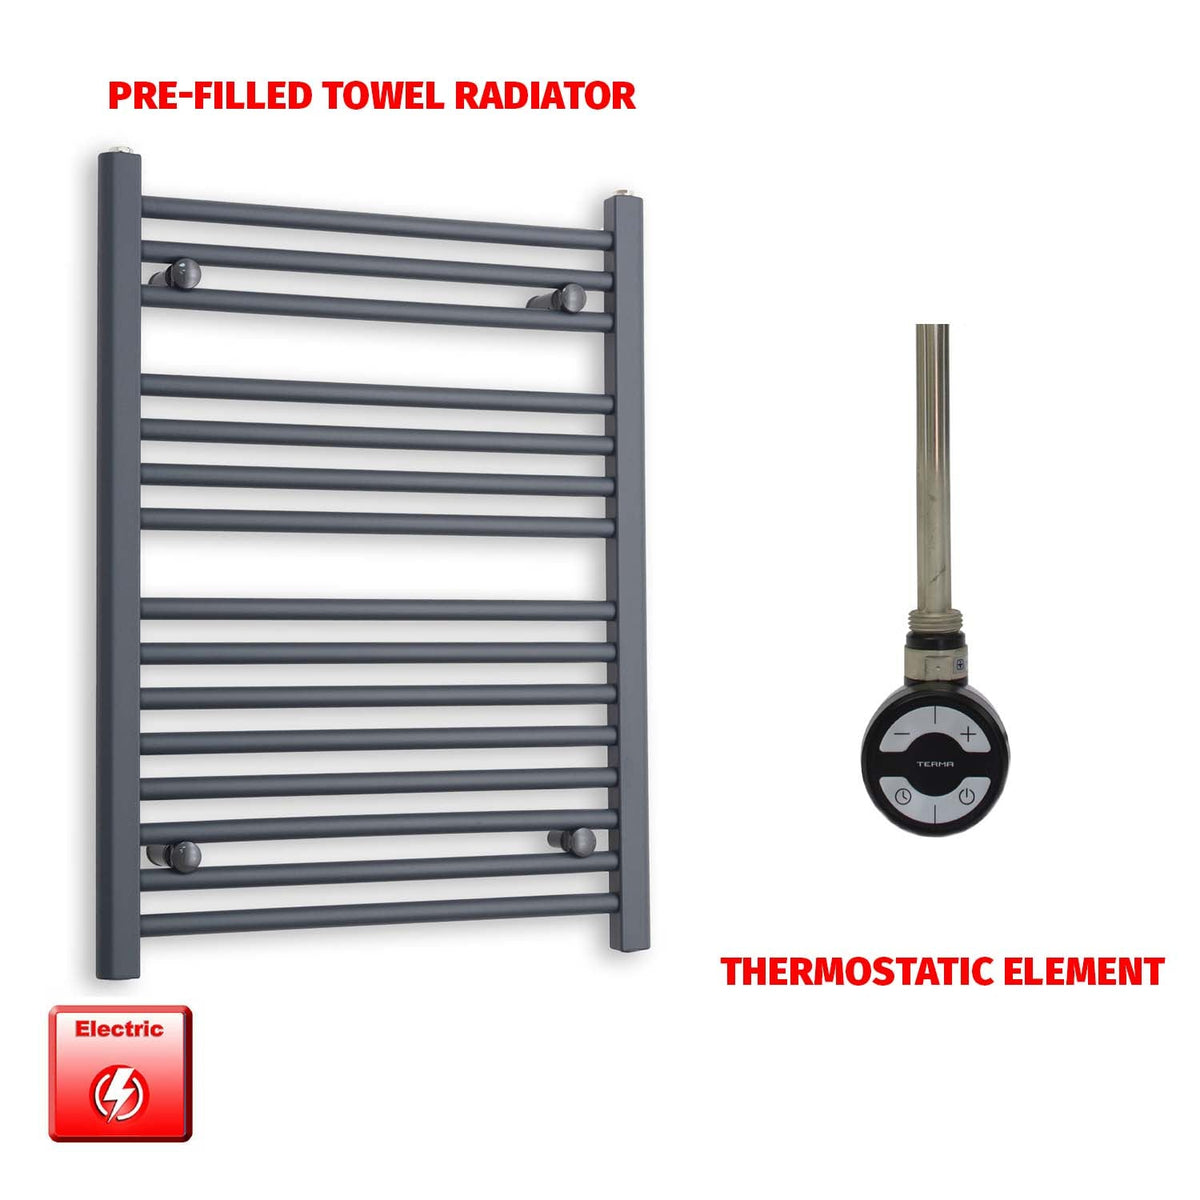 800mm High 600mm Wide Flat Anthracite Pre-Filled Electric Heated Towel Rail Radiator HTR MOA Thermostatic element no timer